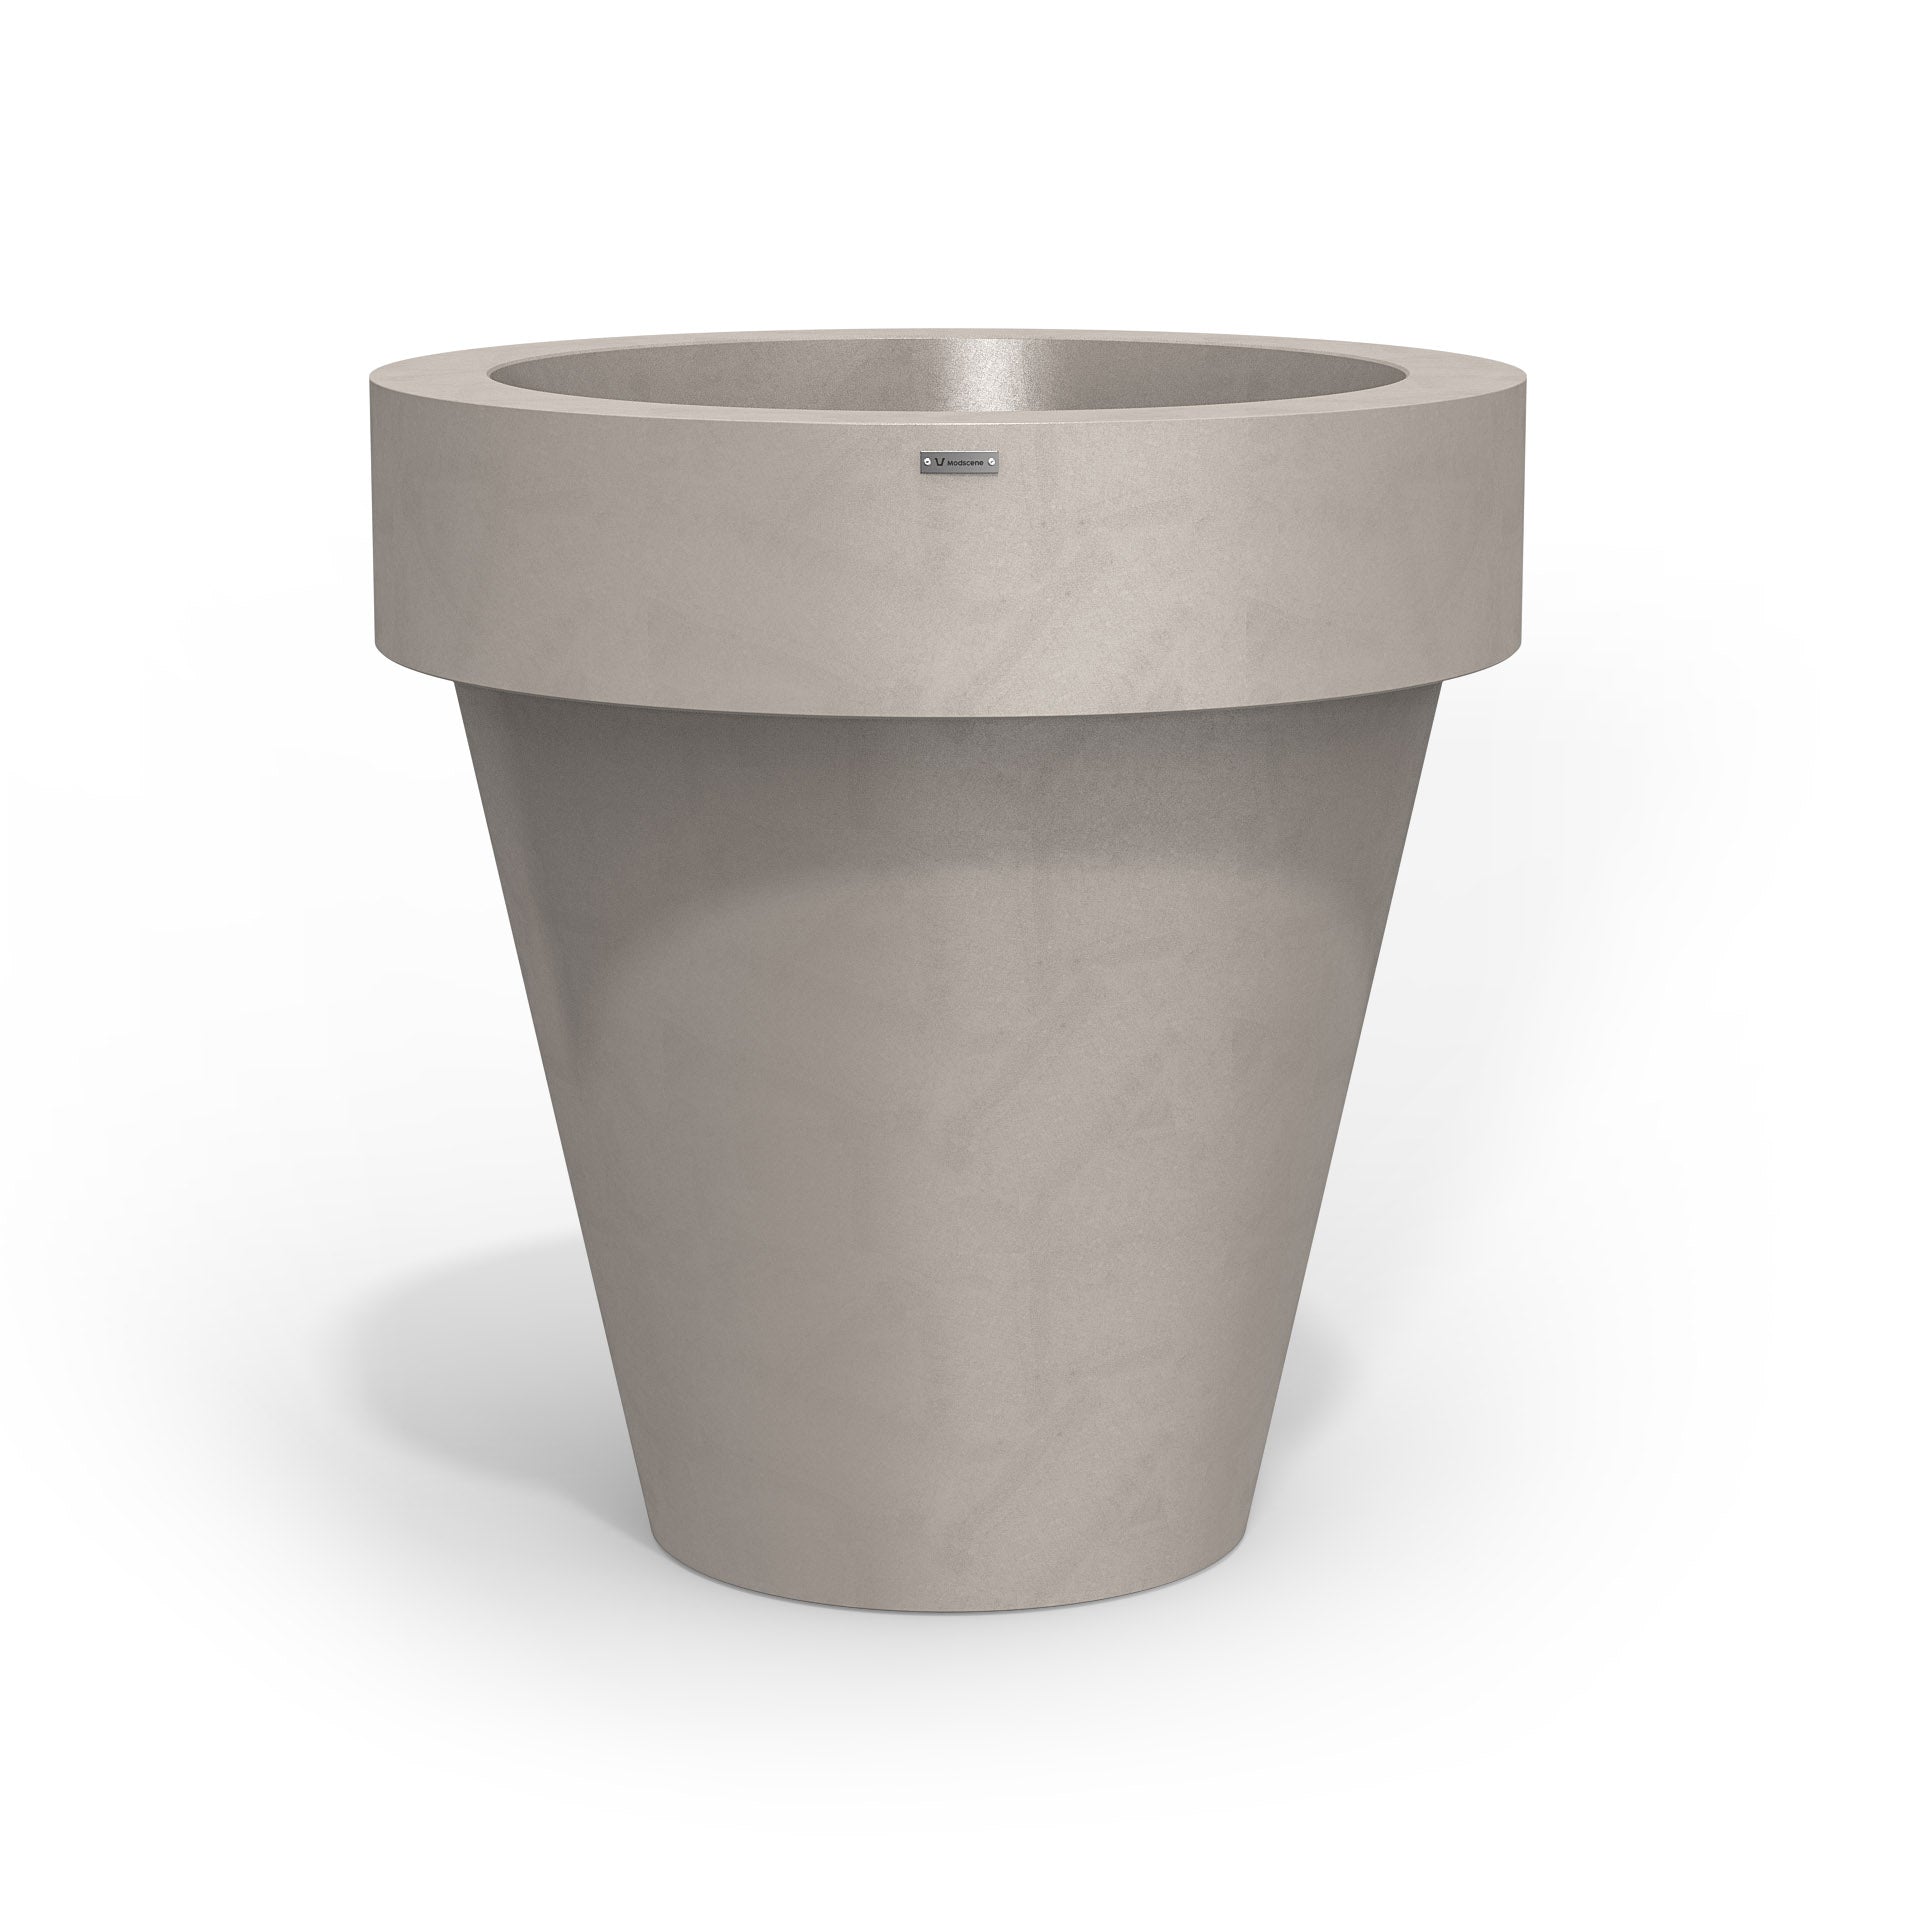 Extra large Modscene planter pot in a sandstone colour with a concrete look.